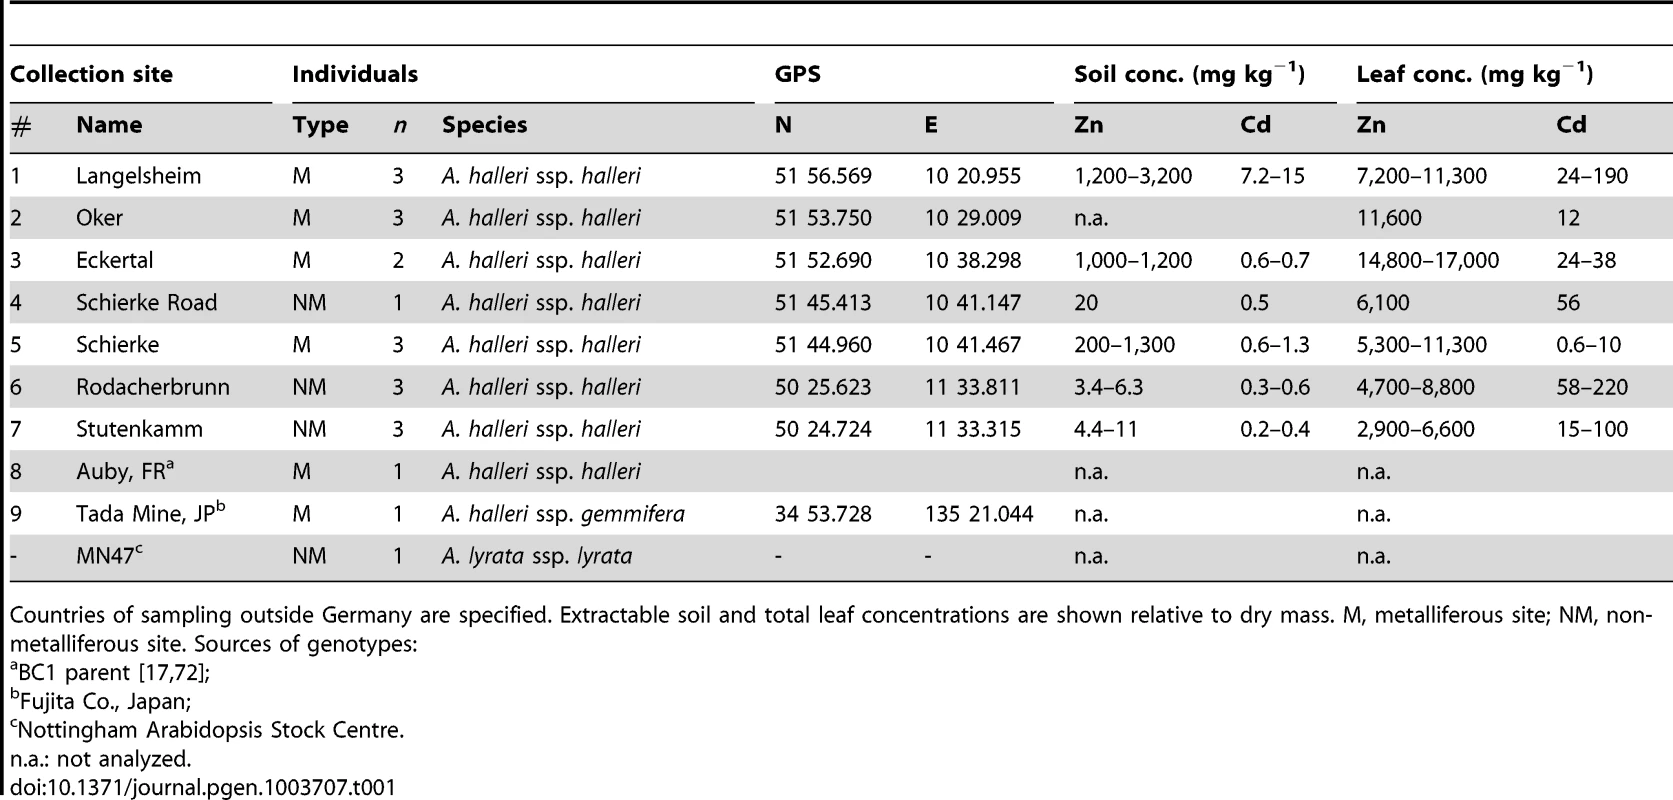 Origin of <i>Arabidopsis halleri</i> individuals and other plants used in this study.